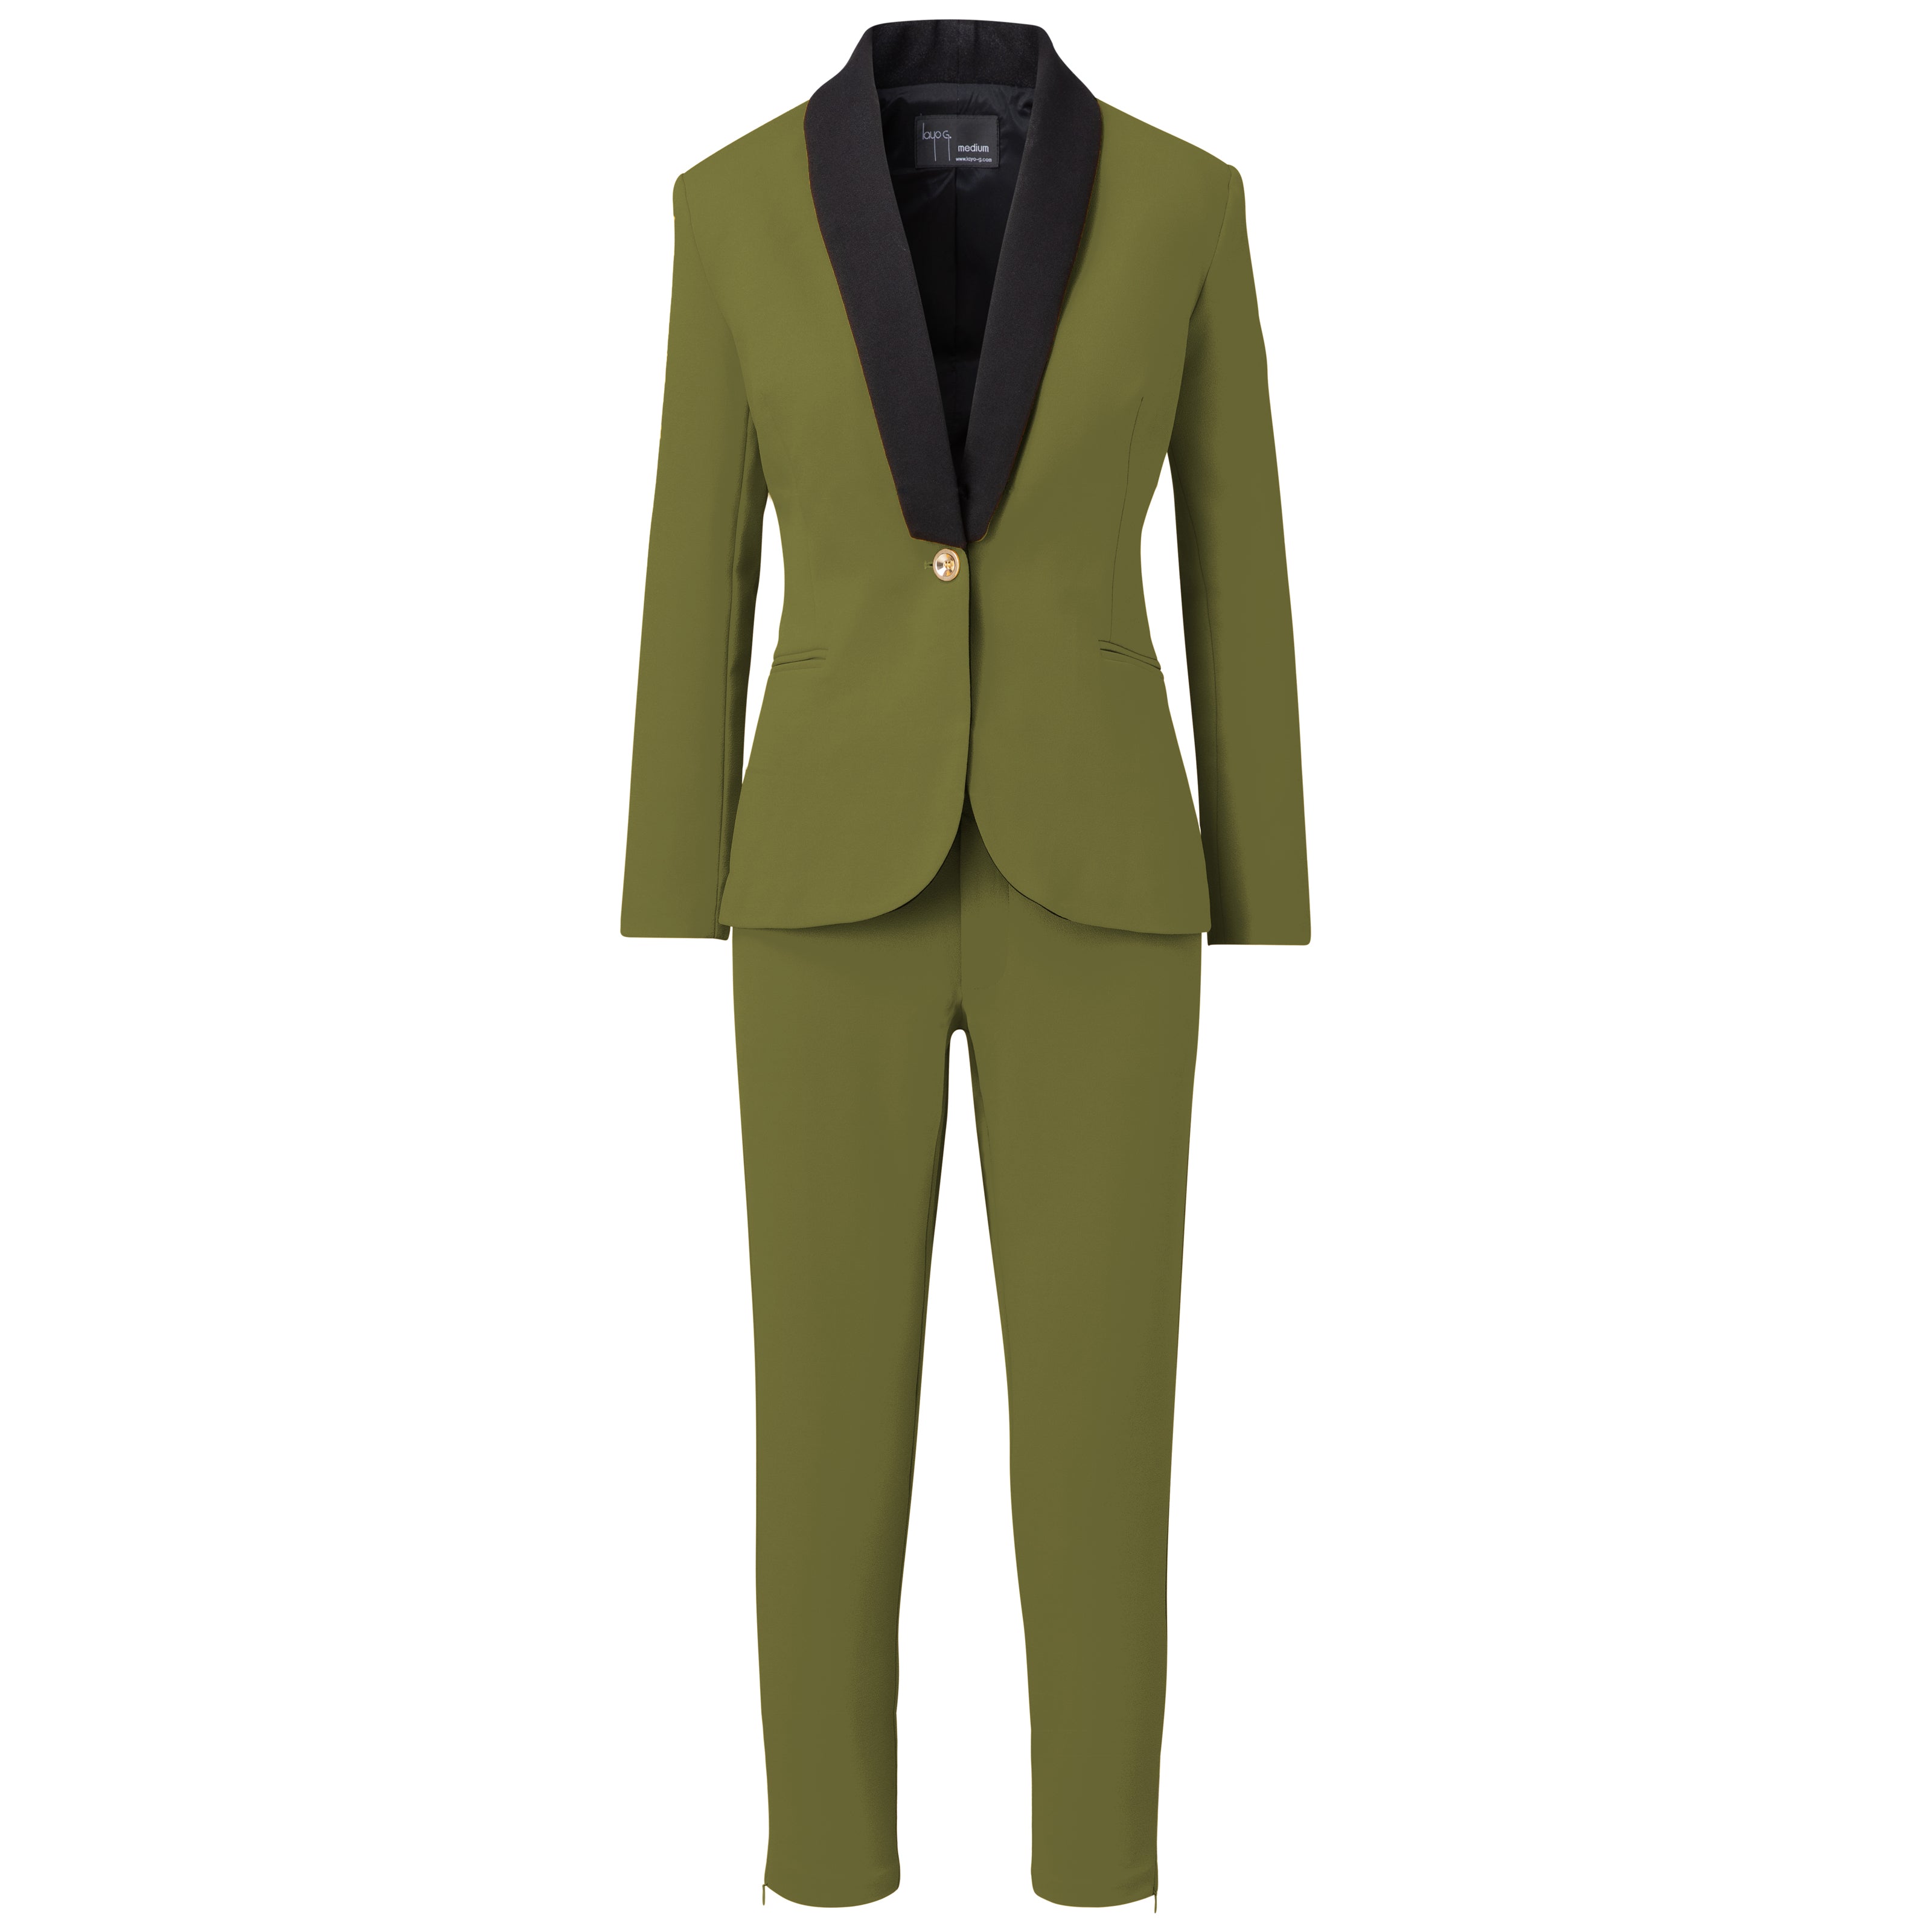 Women's Suits, A Bad Ass Olive Green Suit